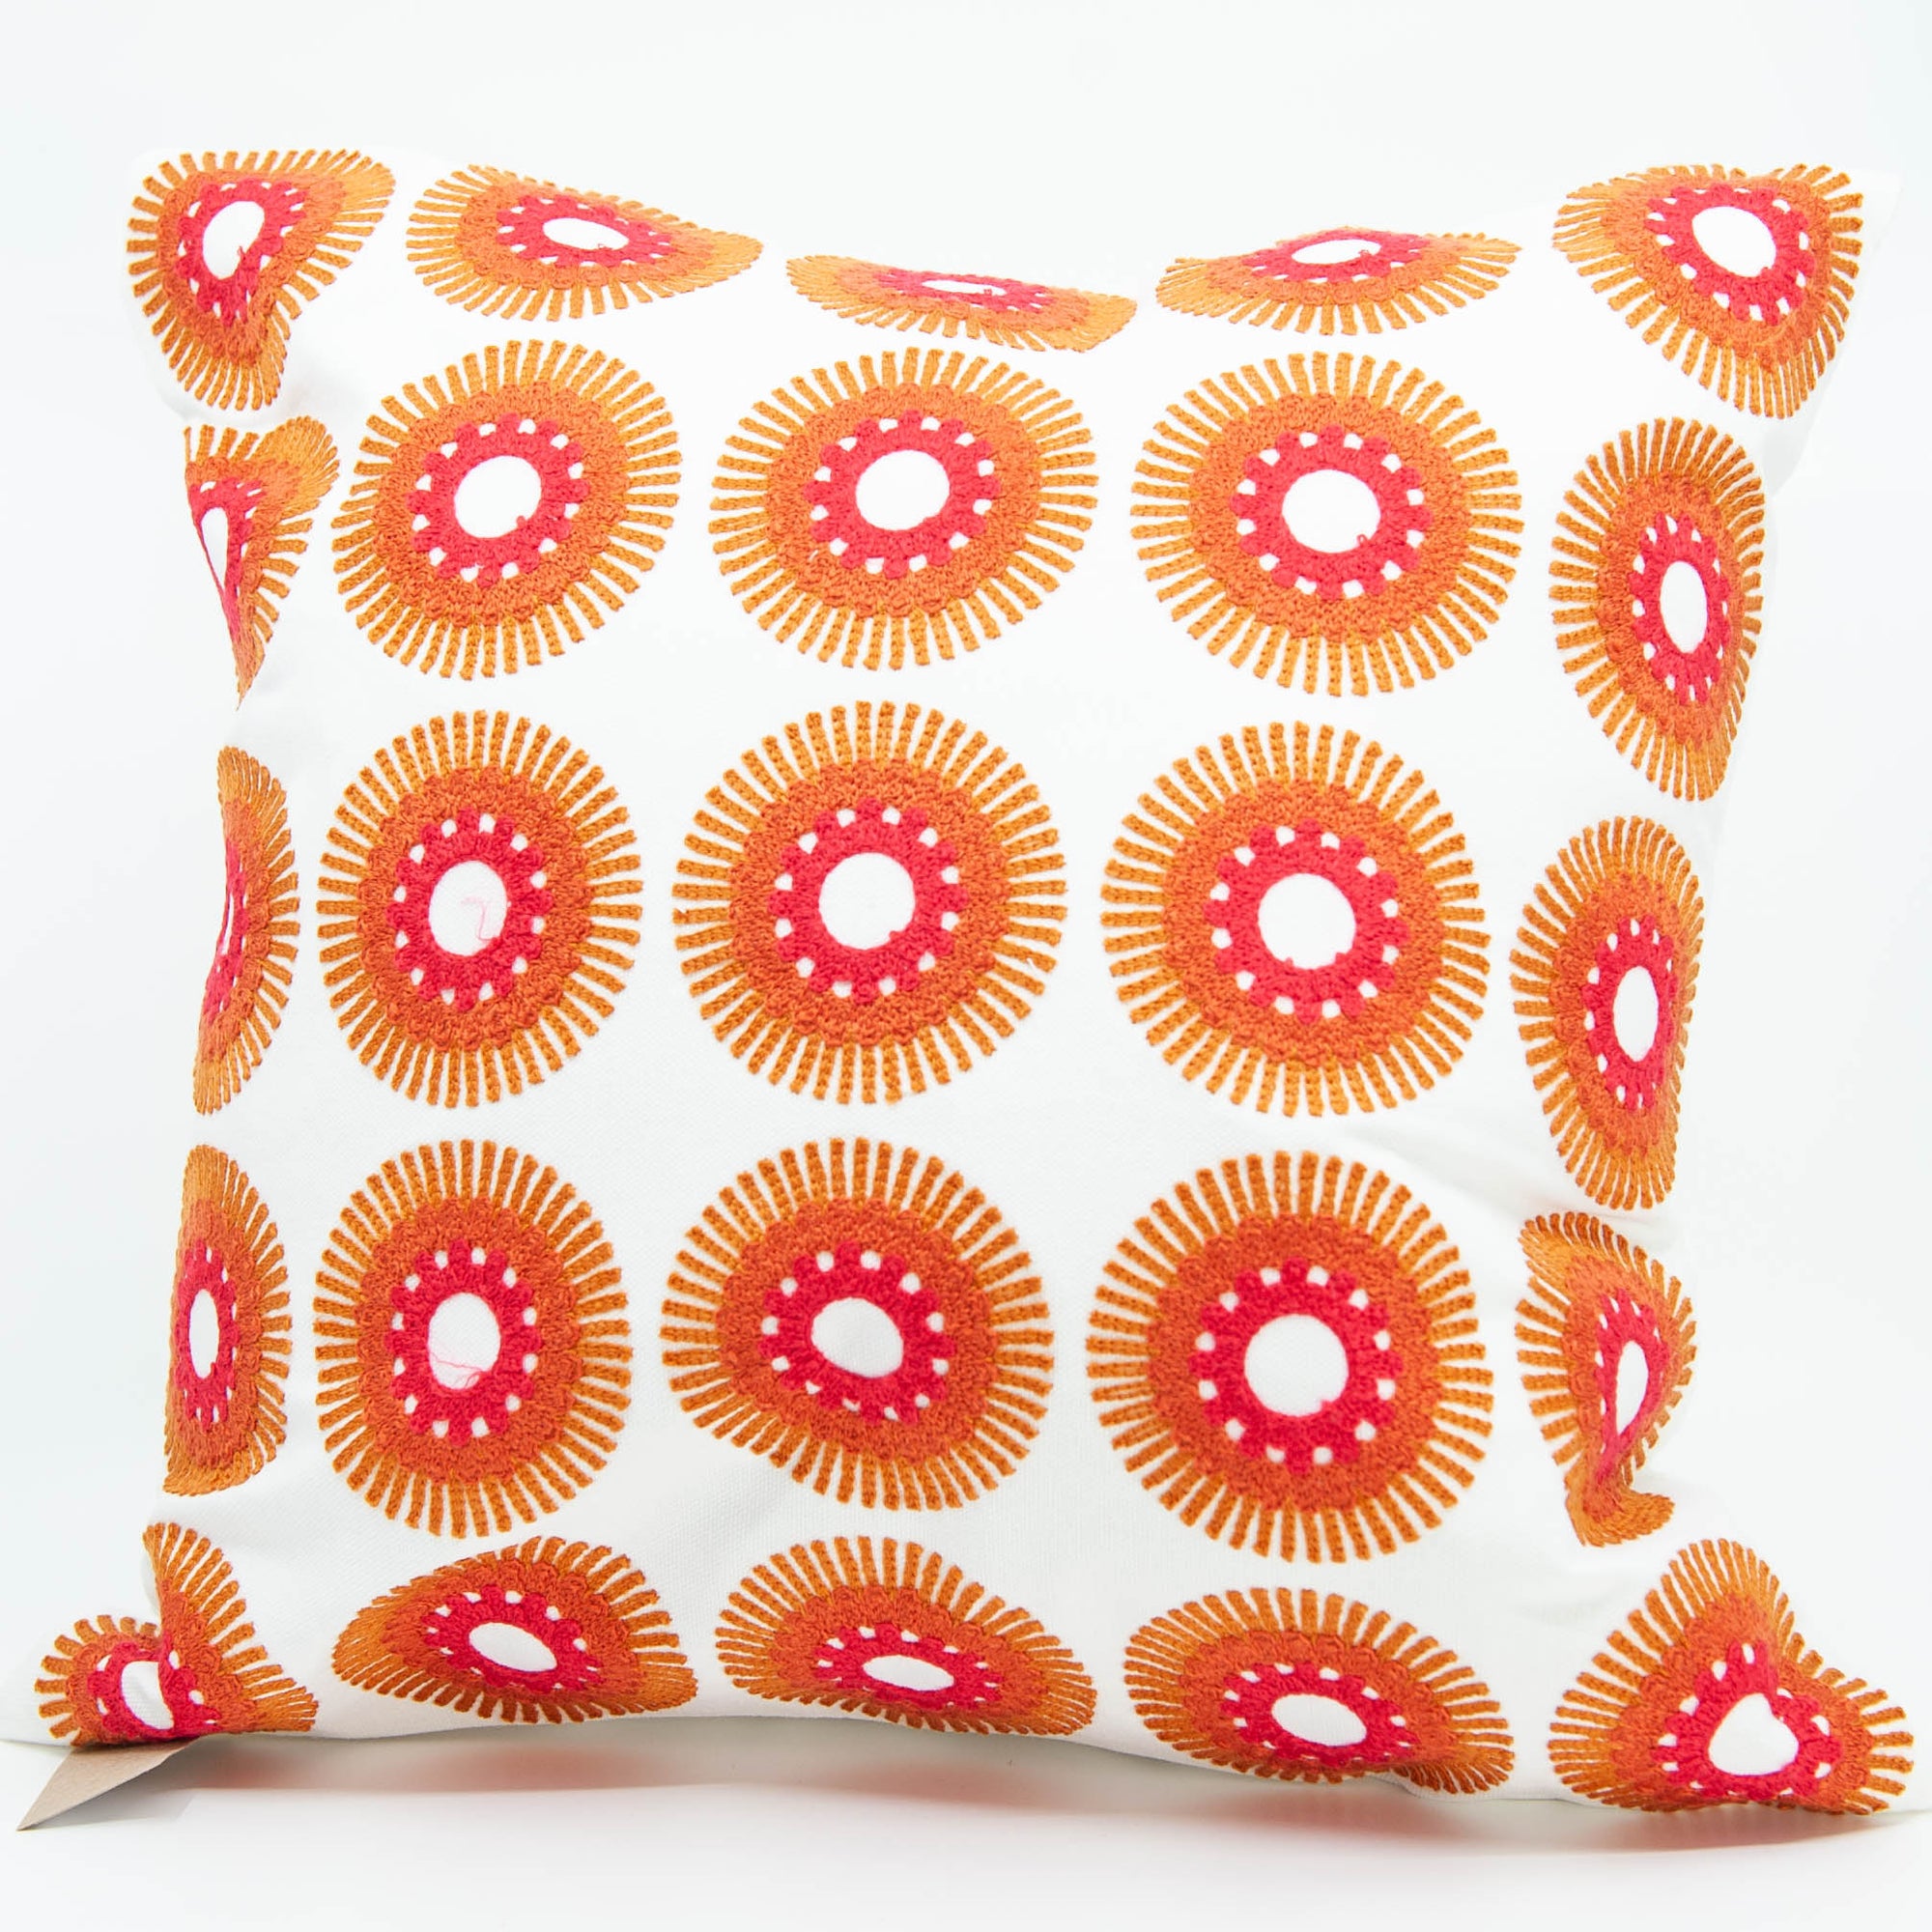 Embroidered Pillow Cover - Red Circle